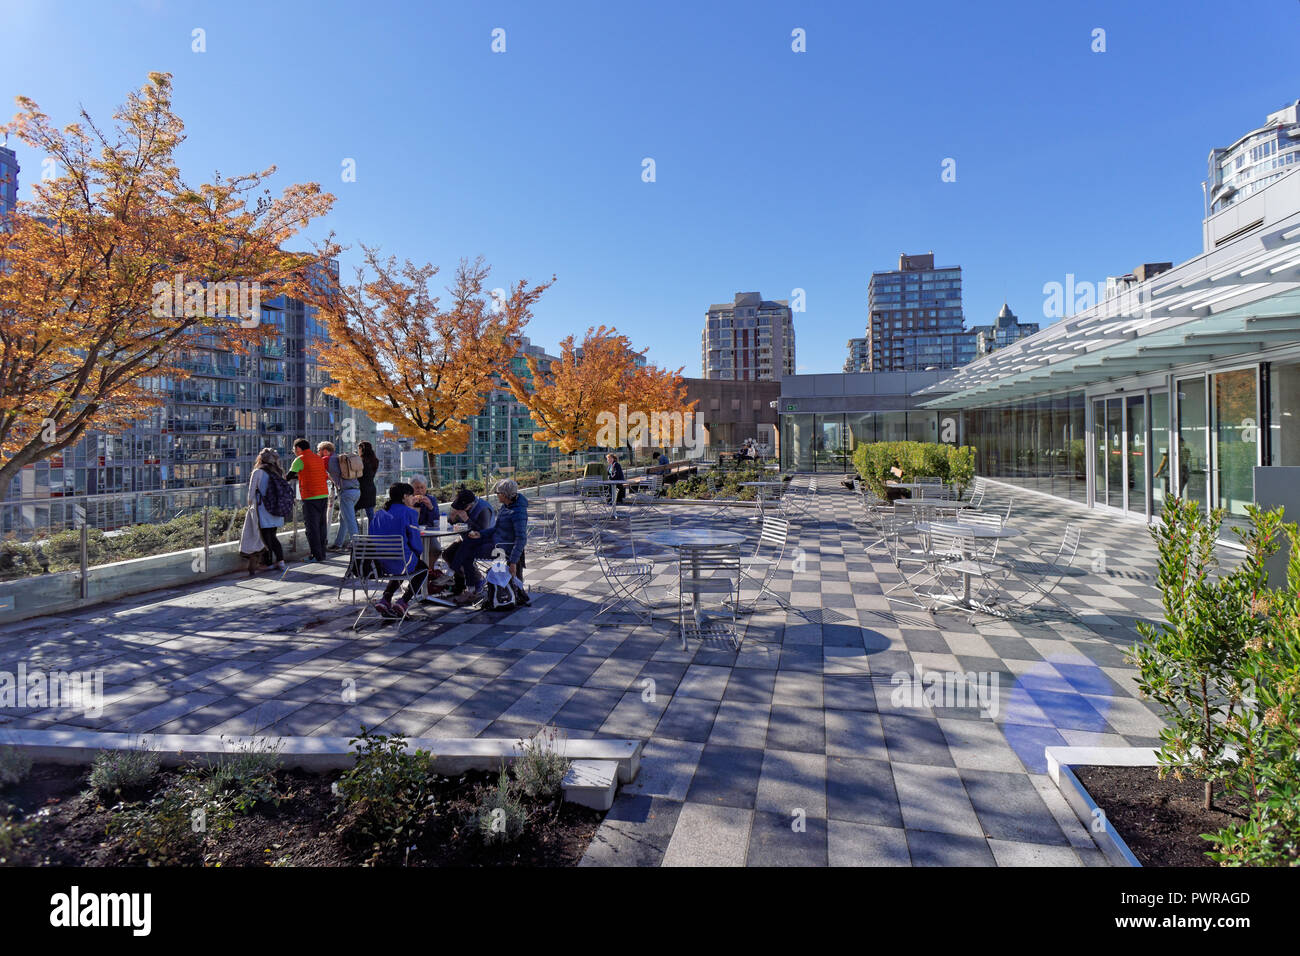 People relaxing on the Vancouver Public Library rooftop garden that opened on September 29, 2018, Vancouver, BC, Canada Stock Photo